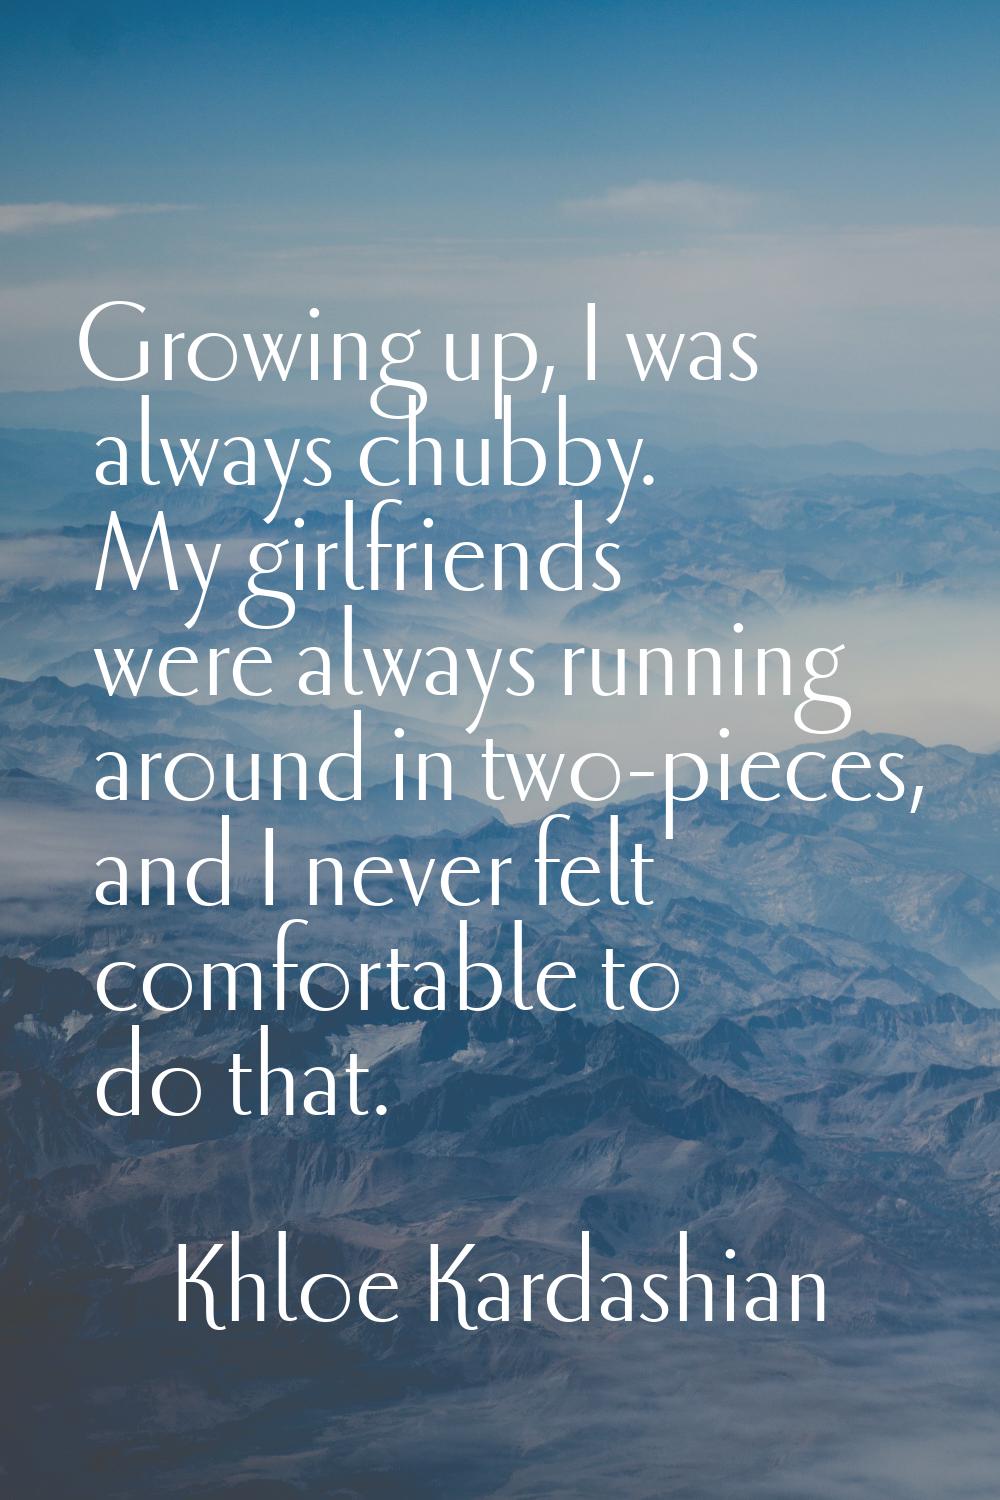 Growing up, I was always chubby. My girlfriends were always running around in two-pieces, and I nev